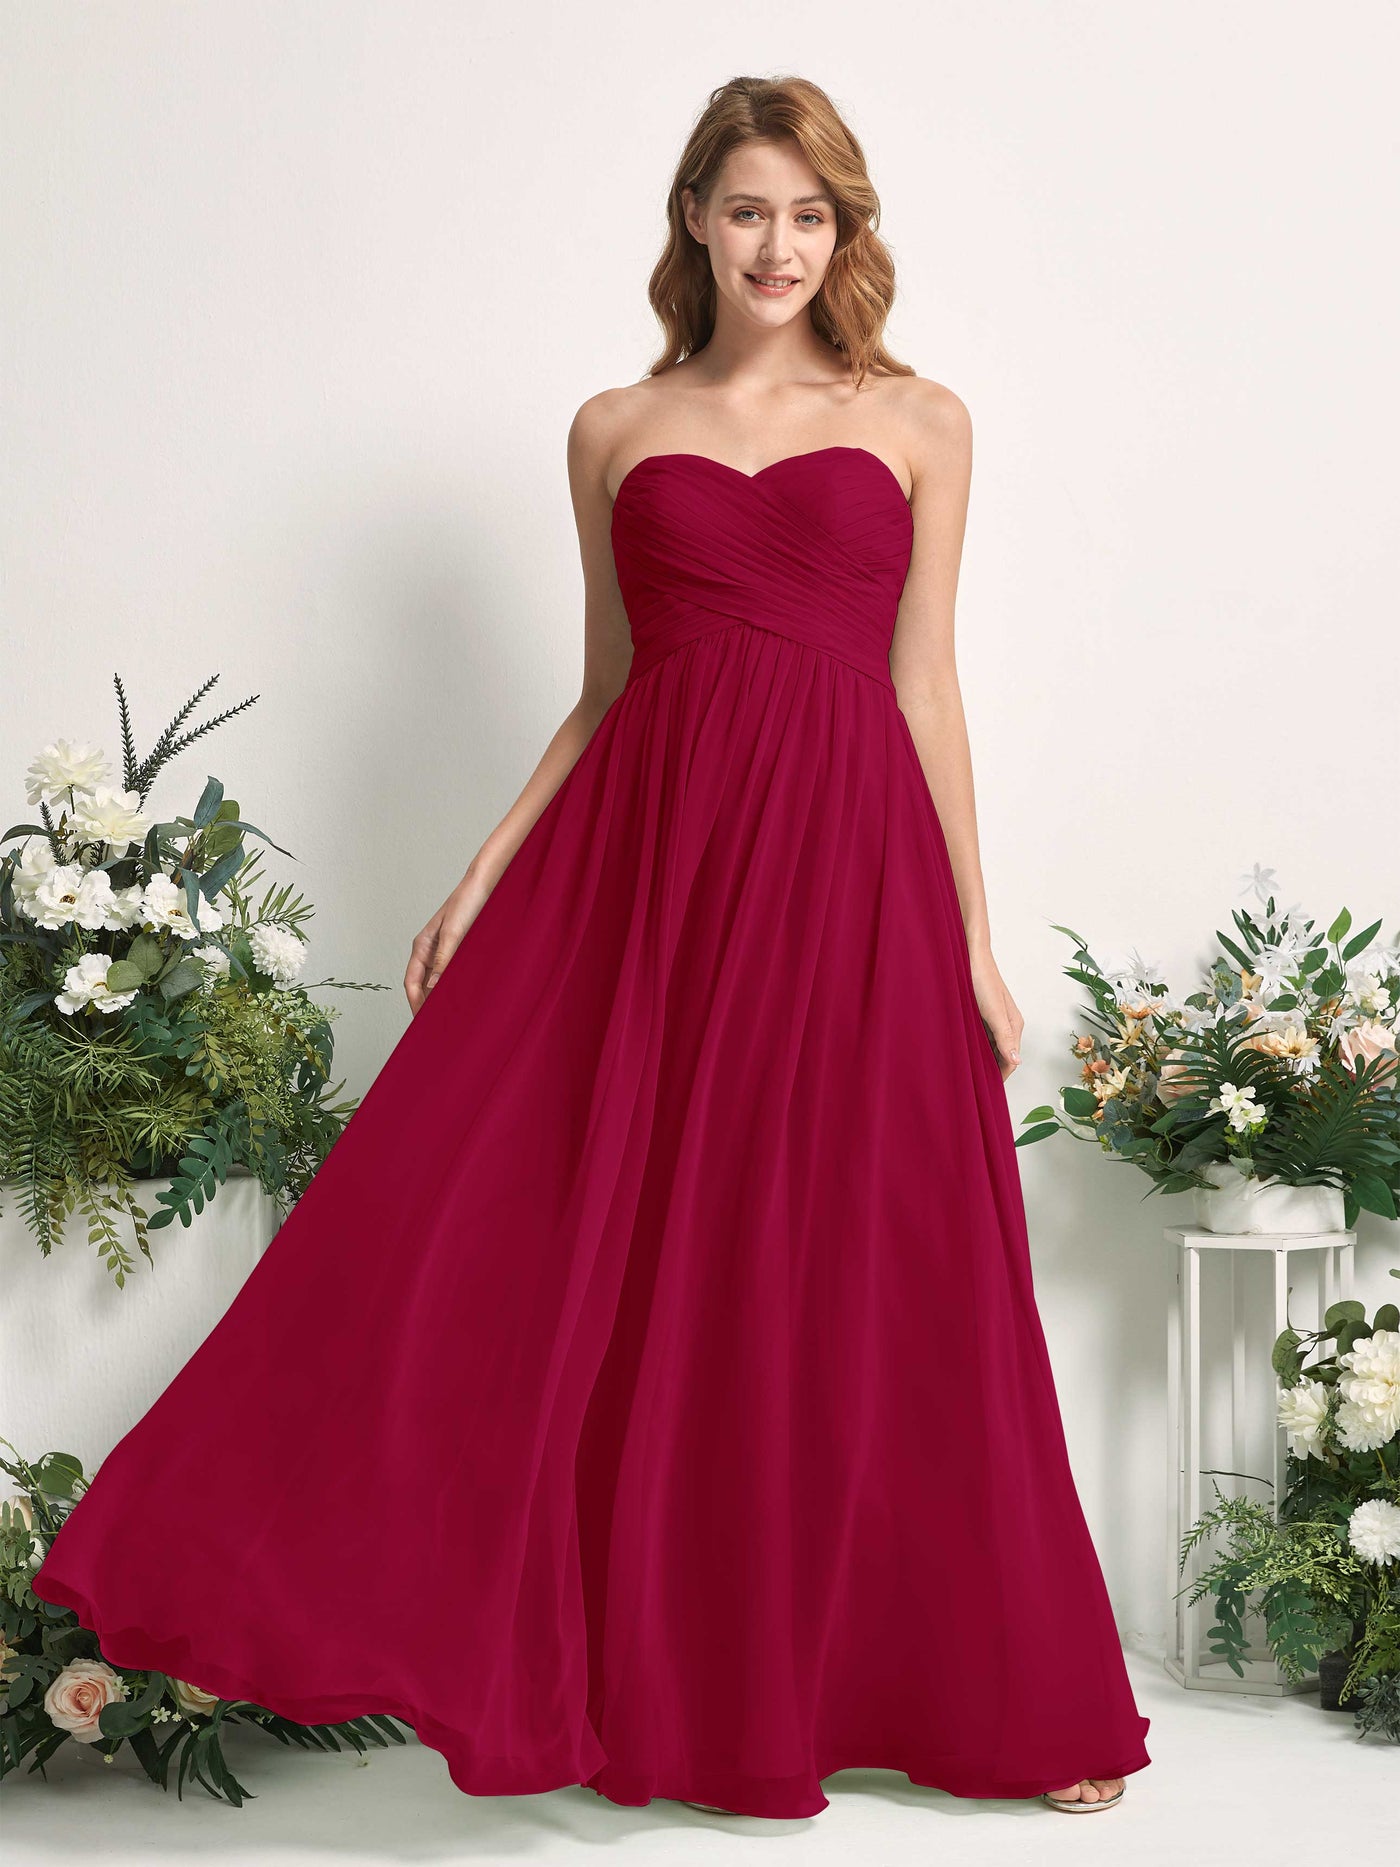 Bridesmaid Dress A-line Chiffon Sweetheart Full Length Sleeveless Wedding Party Dress - Jester Red (81226941)#color_jester-red